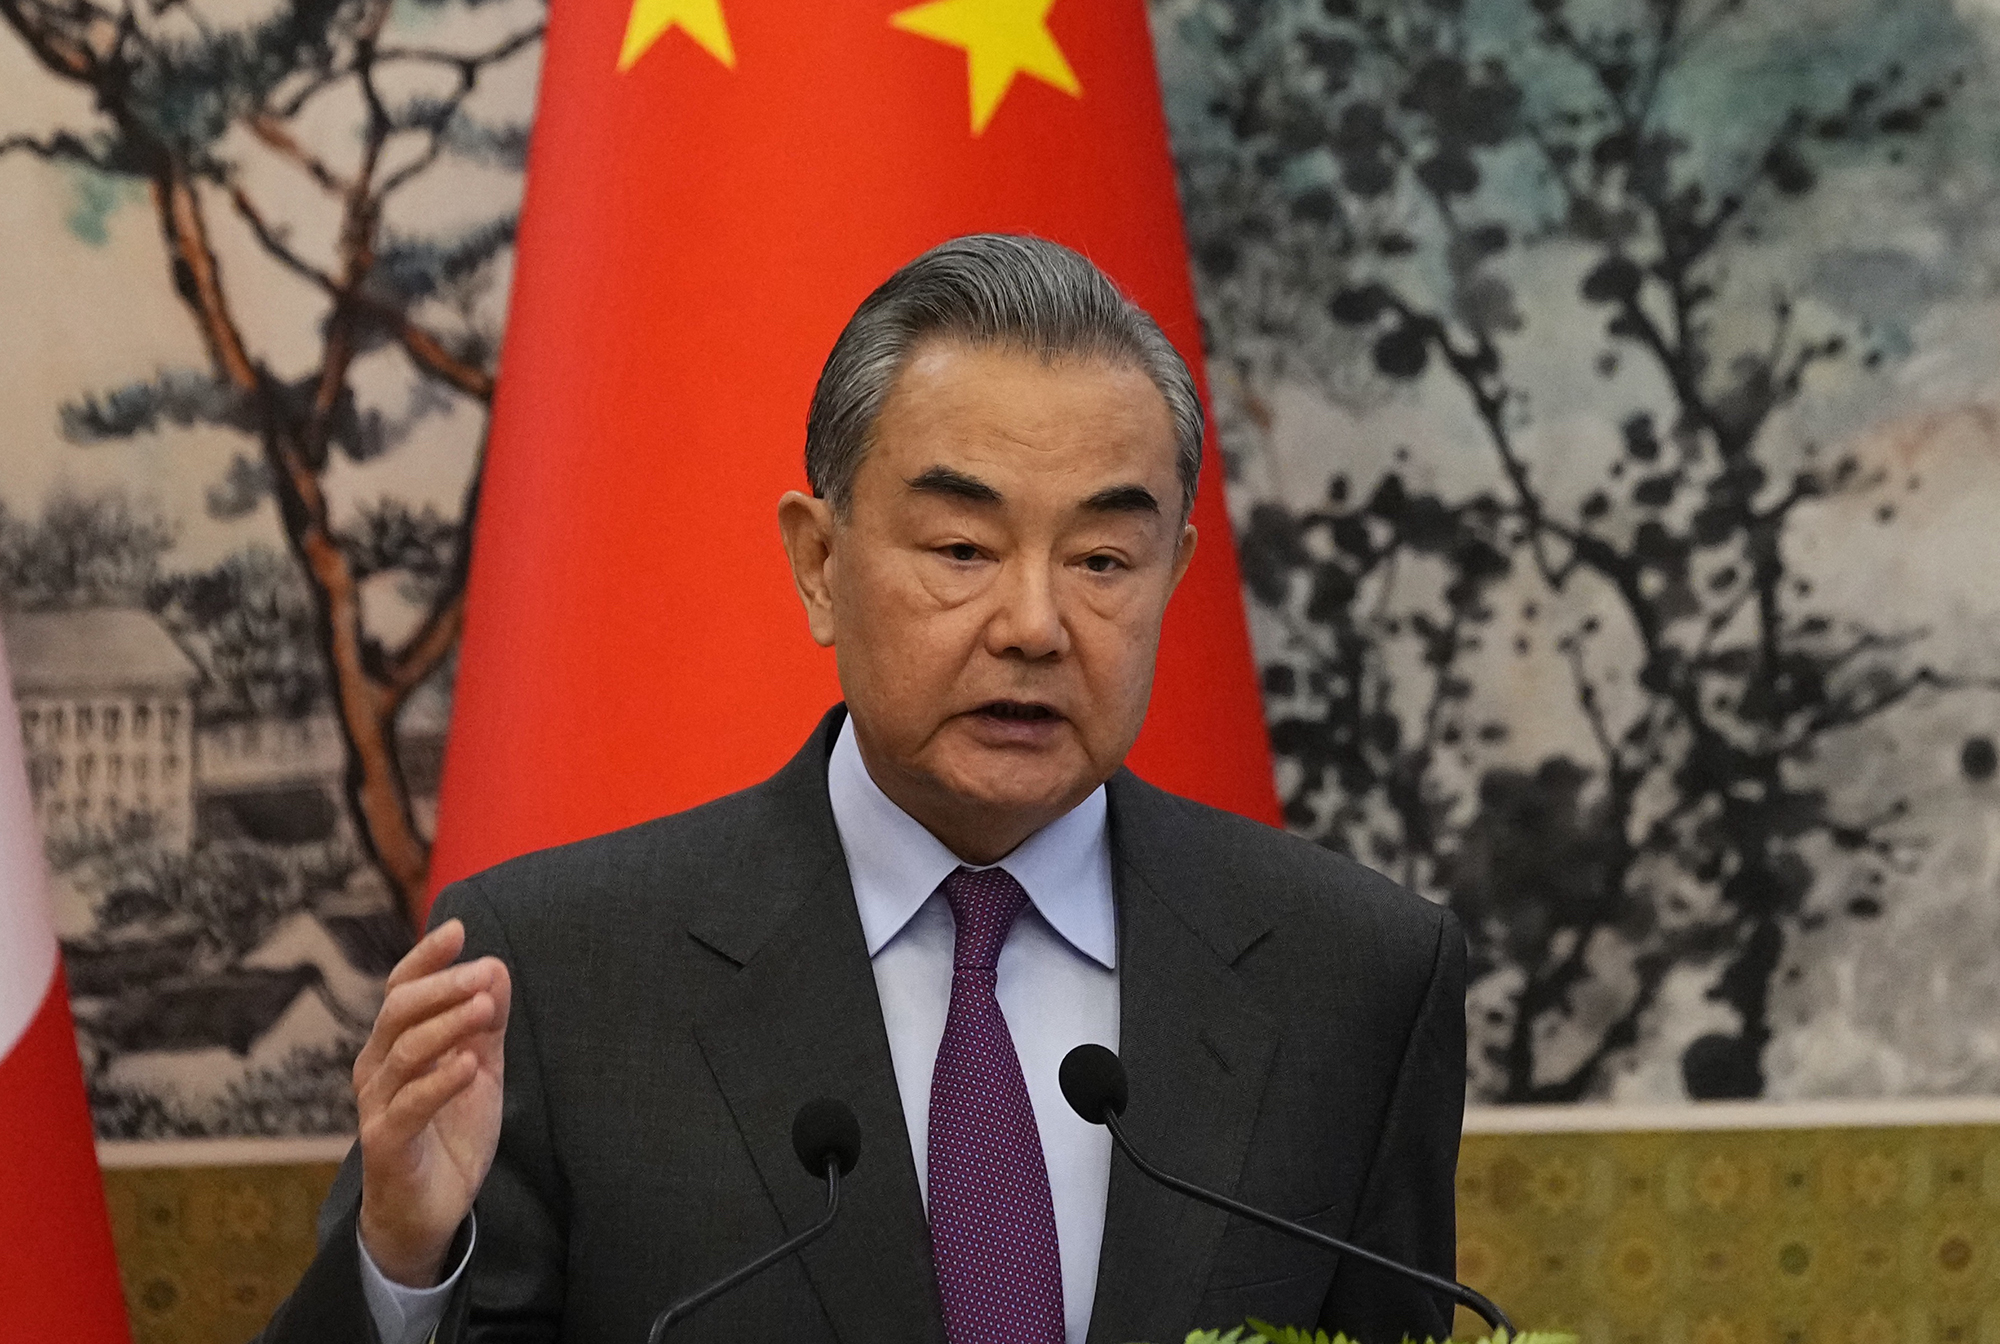 China's Foreign Minister Wang Yi speaks during a press conference at the Diaoyutai State Guesthouse in Beijing, China, on April 1.